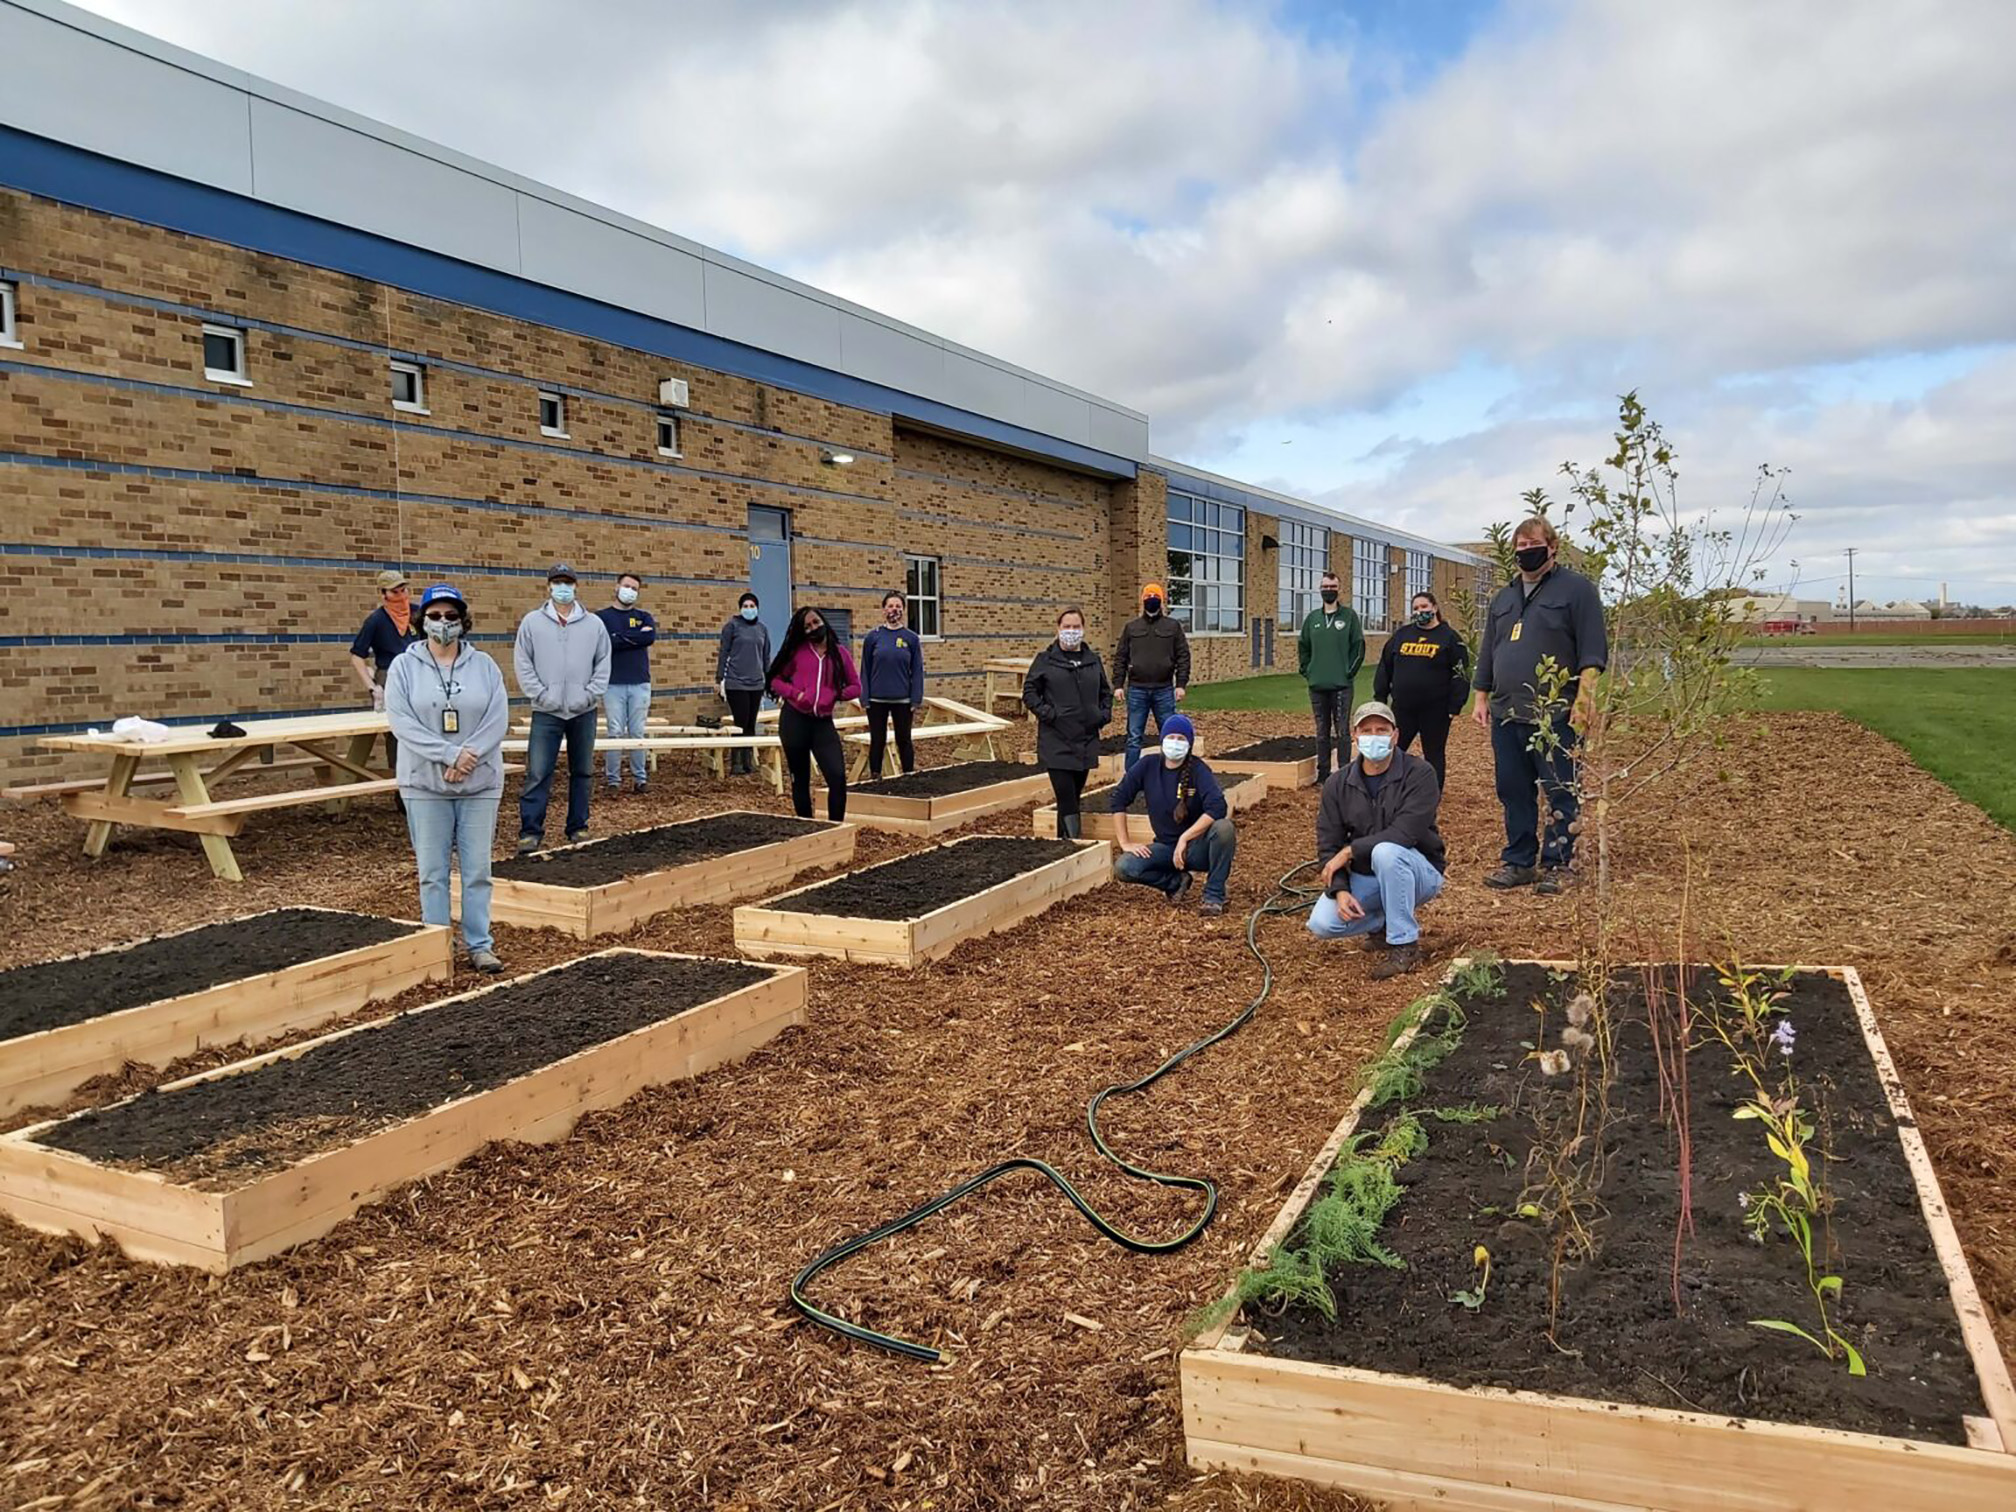 A group of people stand in the school garden that they have just finish building. They are wrapped against the cold day in green, black, dark blue, dark gray, pale gray, and red sweatshirts or jackets. The garden has several rectangular raised beds made with pale brown wood and filled with dark brown soil. Rows of green and red plants fill one of them. The beds are surrounds by wood chips and behind is the brick wall of the school building.